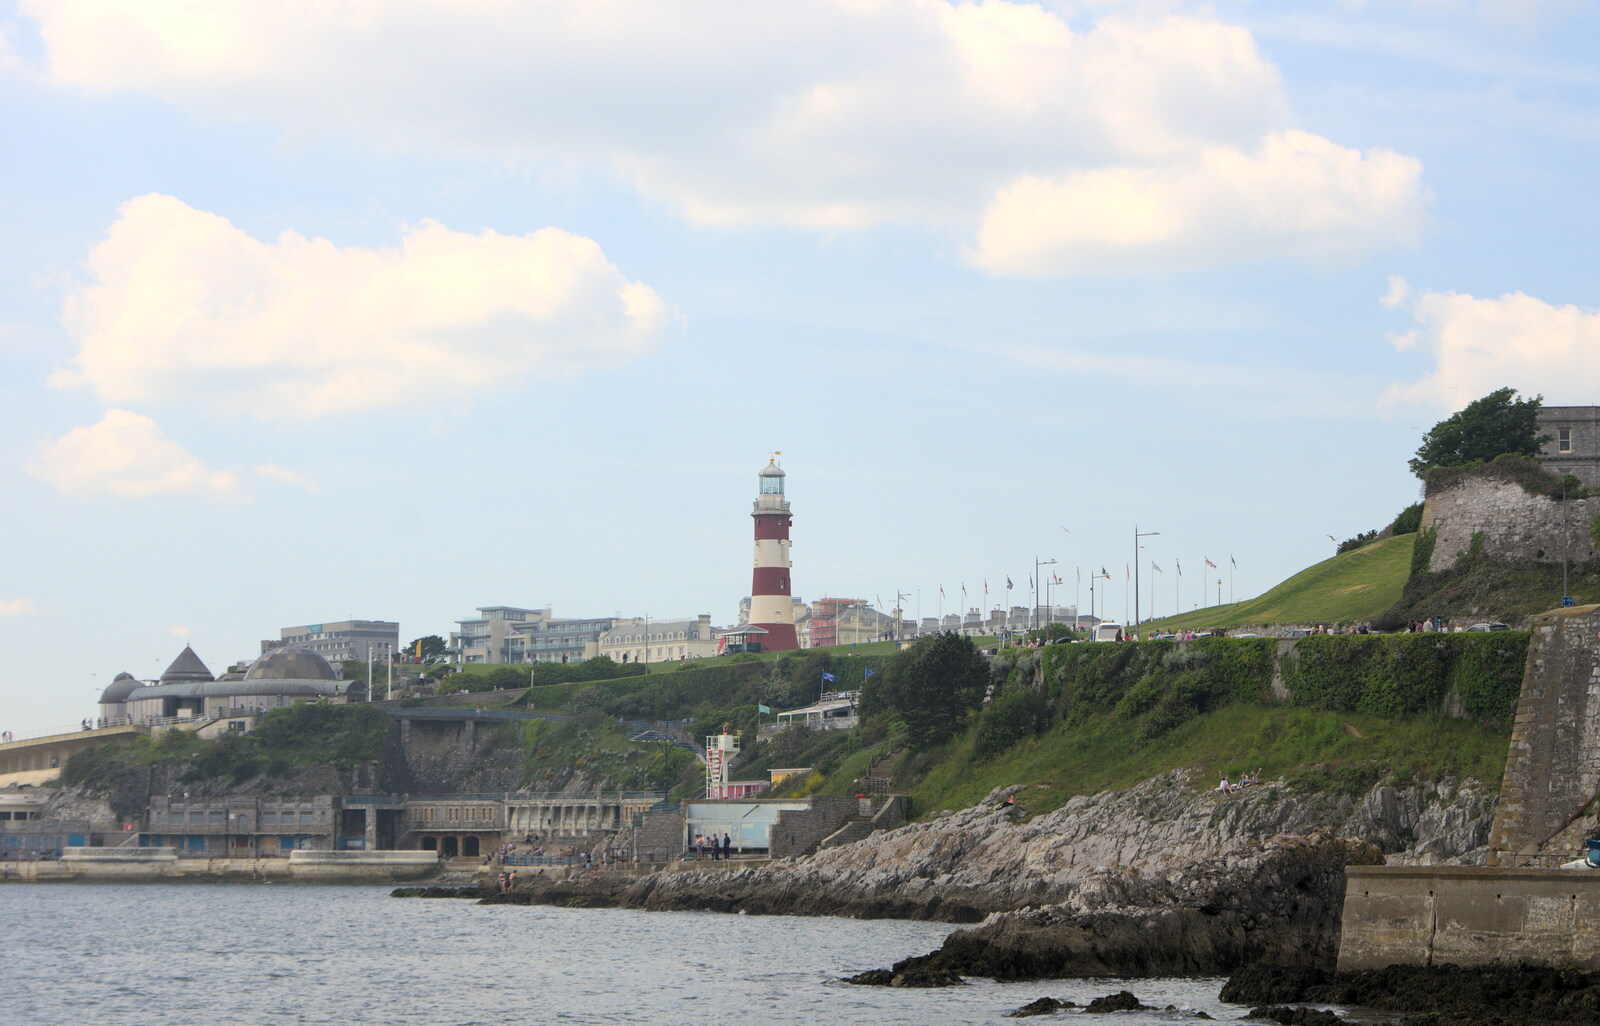 The Hoe, as seen from The Sound from A Tamar River Trip, Plymouth, Devon - 30th May 2016